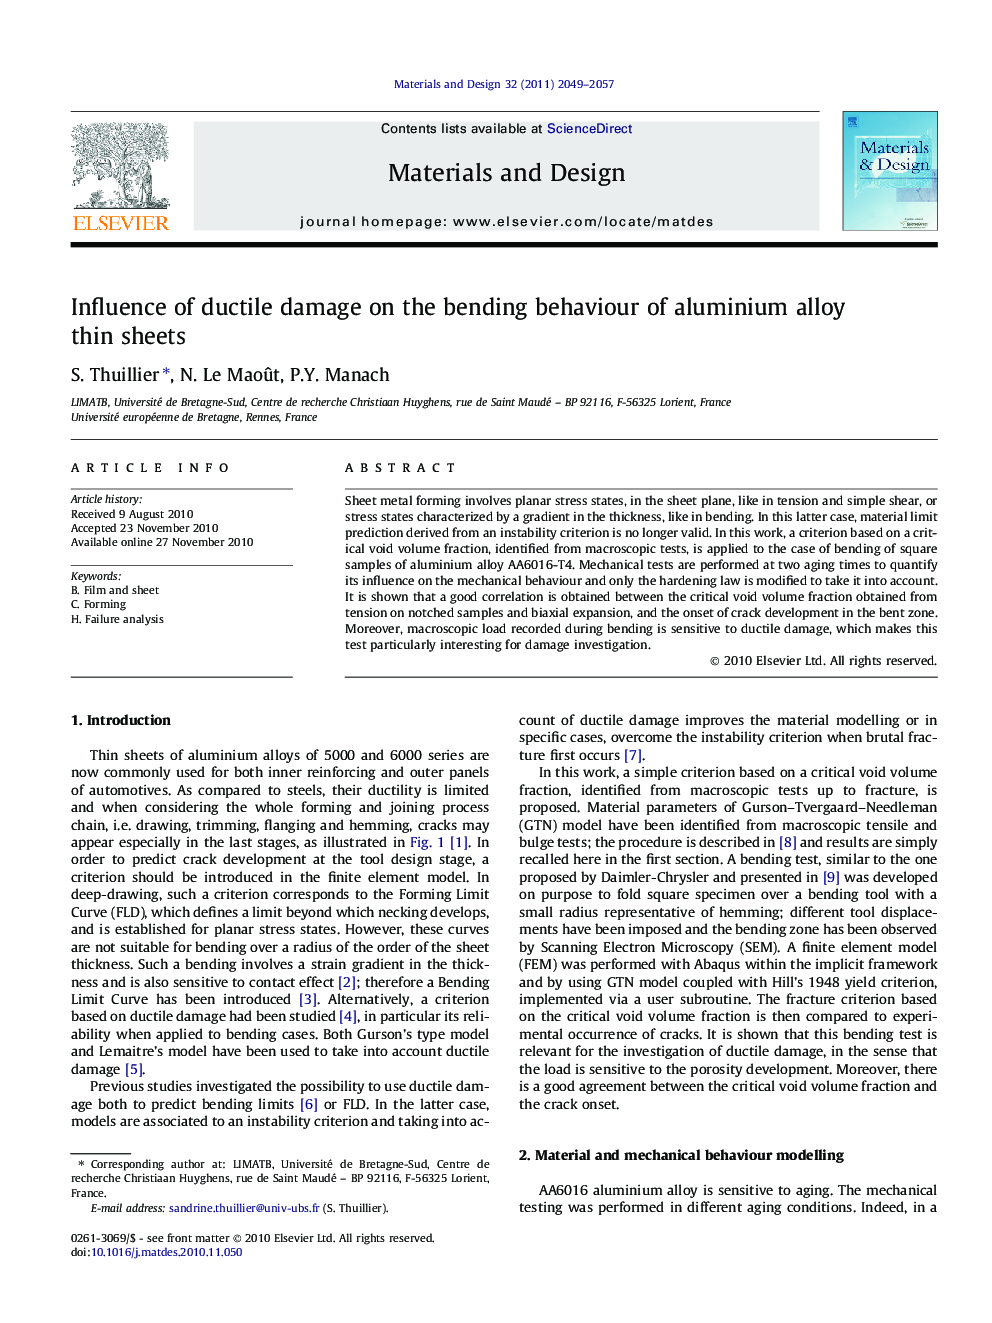 Influence of ductile damage on the bending behaviour of aluminium alloy thin sheets